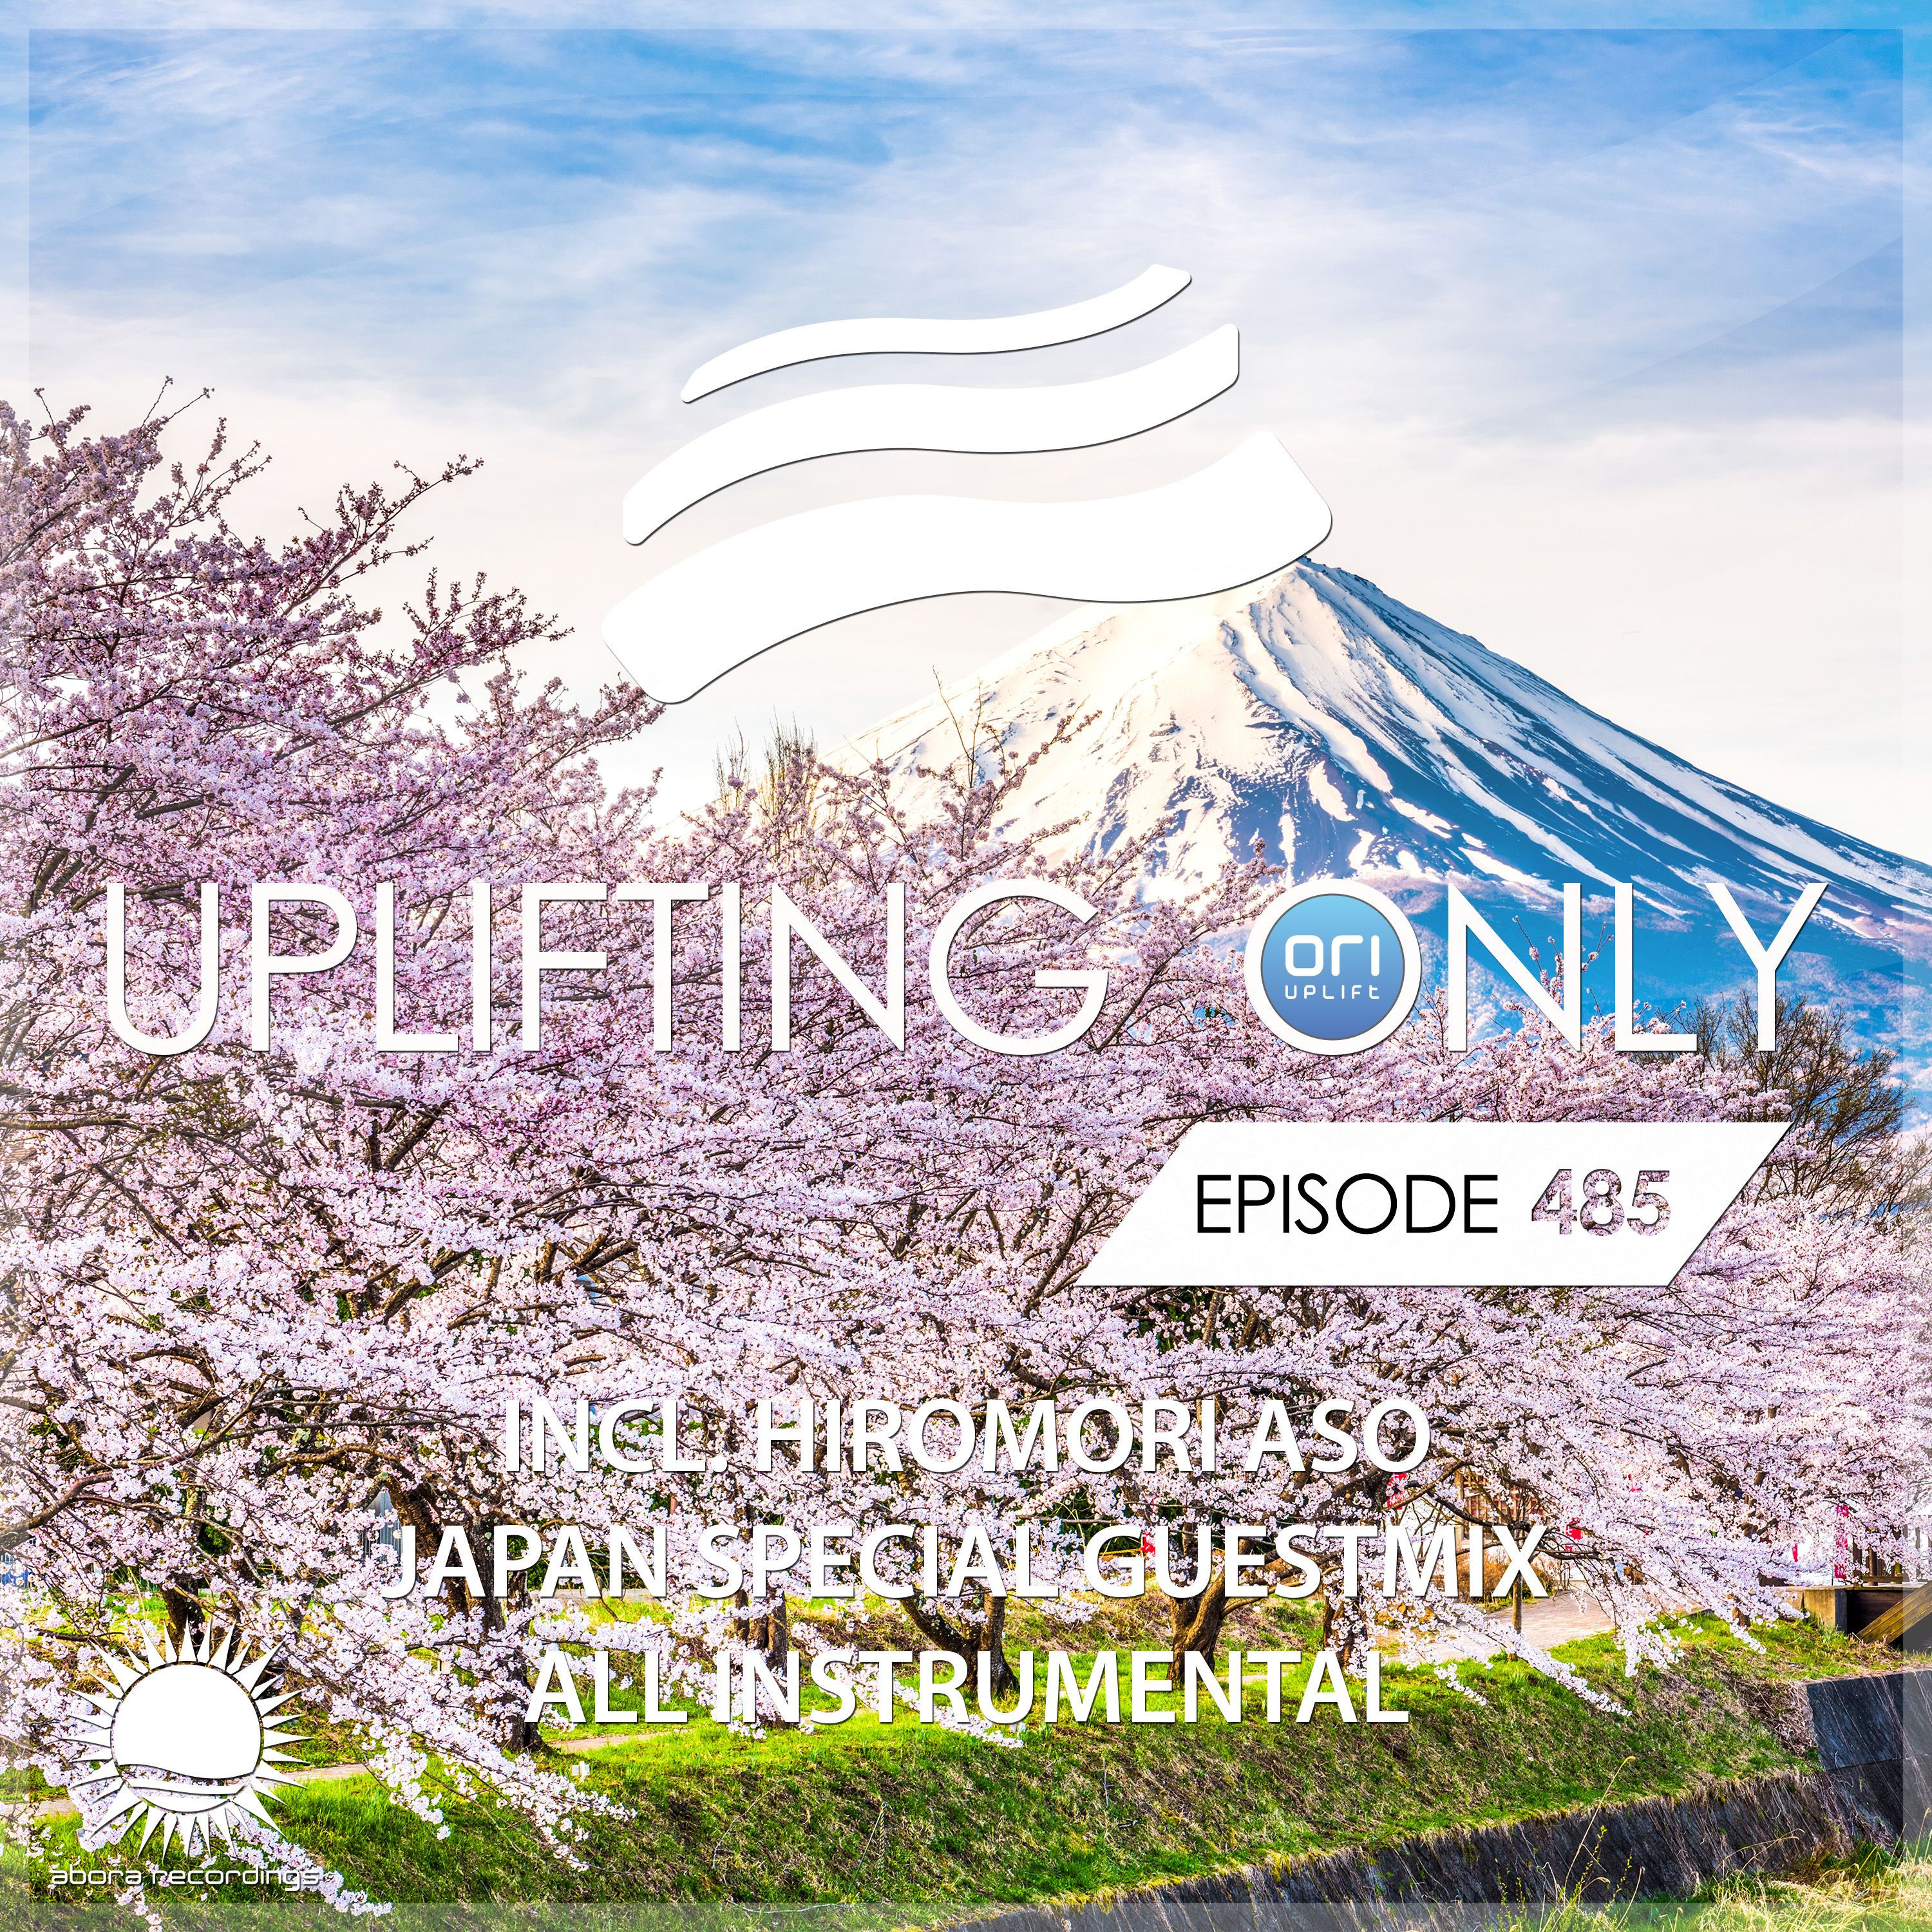 Uplifting Only 485 (May 26, 2022) (incl. Hiromori Aso Guestmix - Japan Special) [All Instrumental]